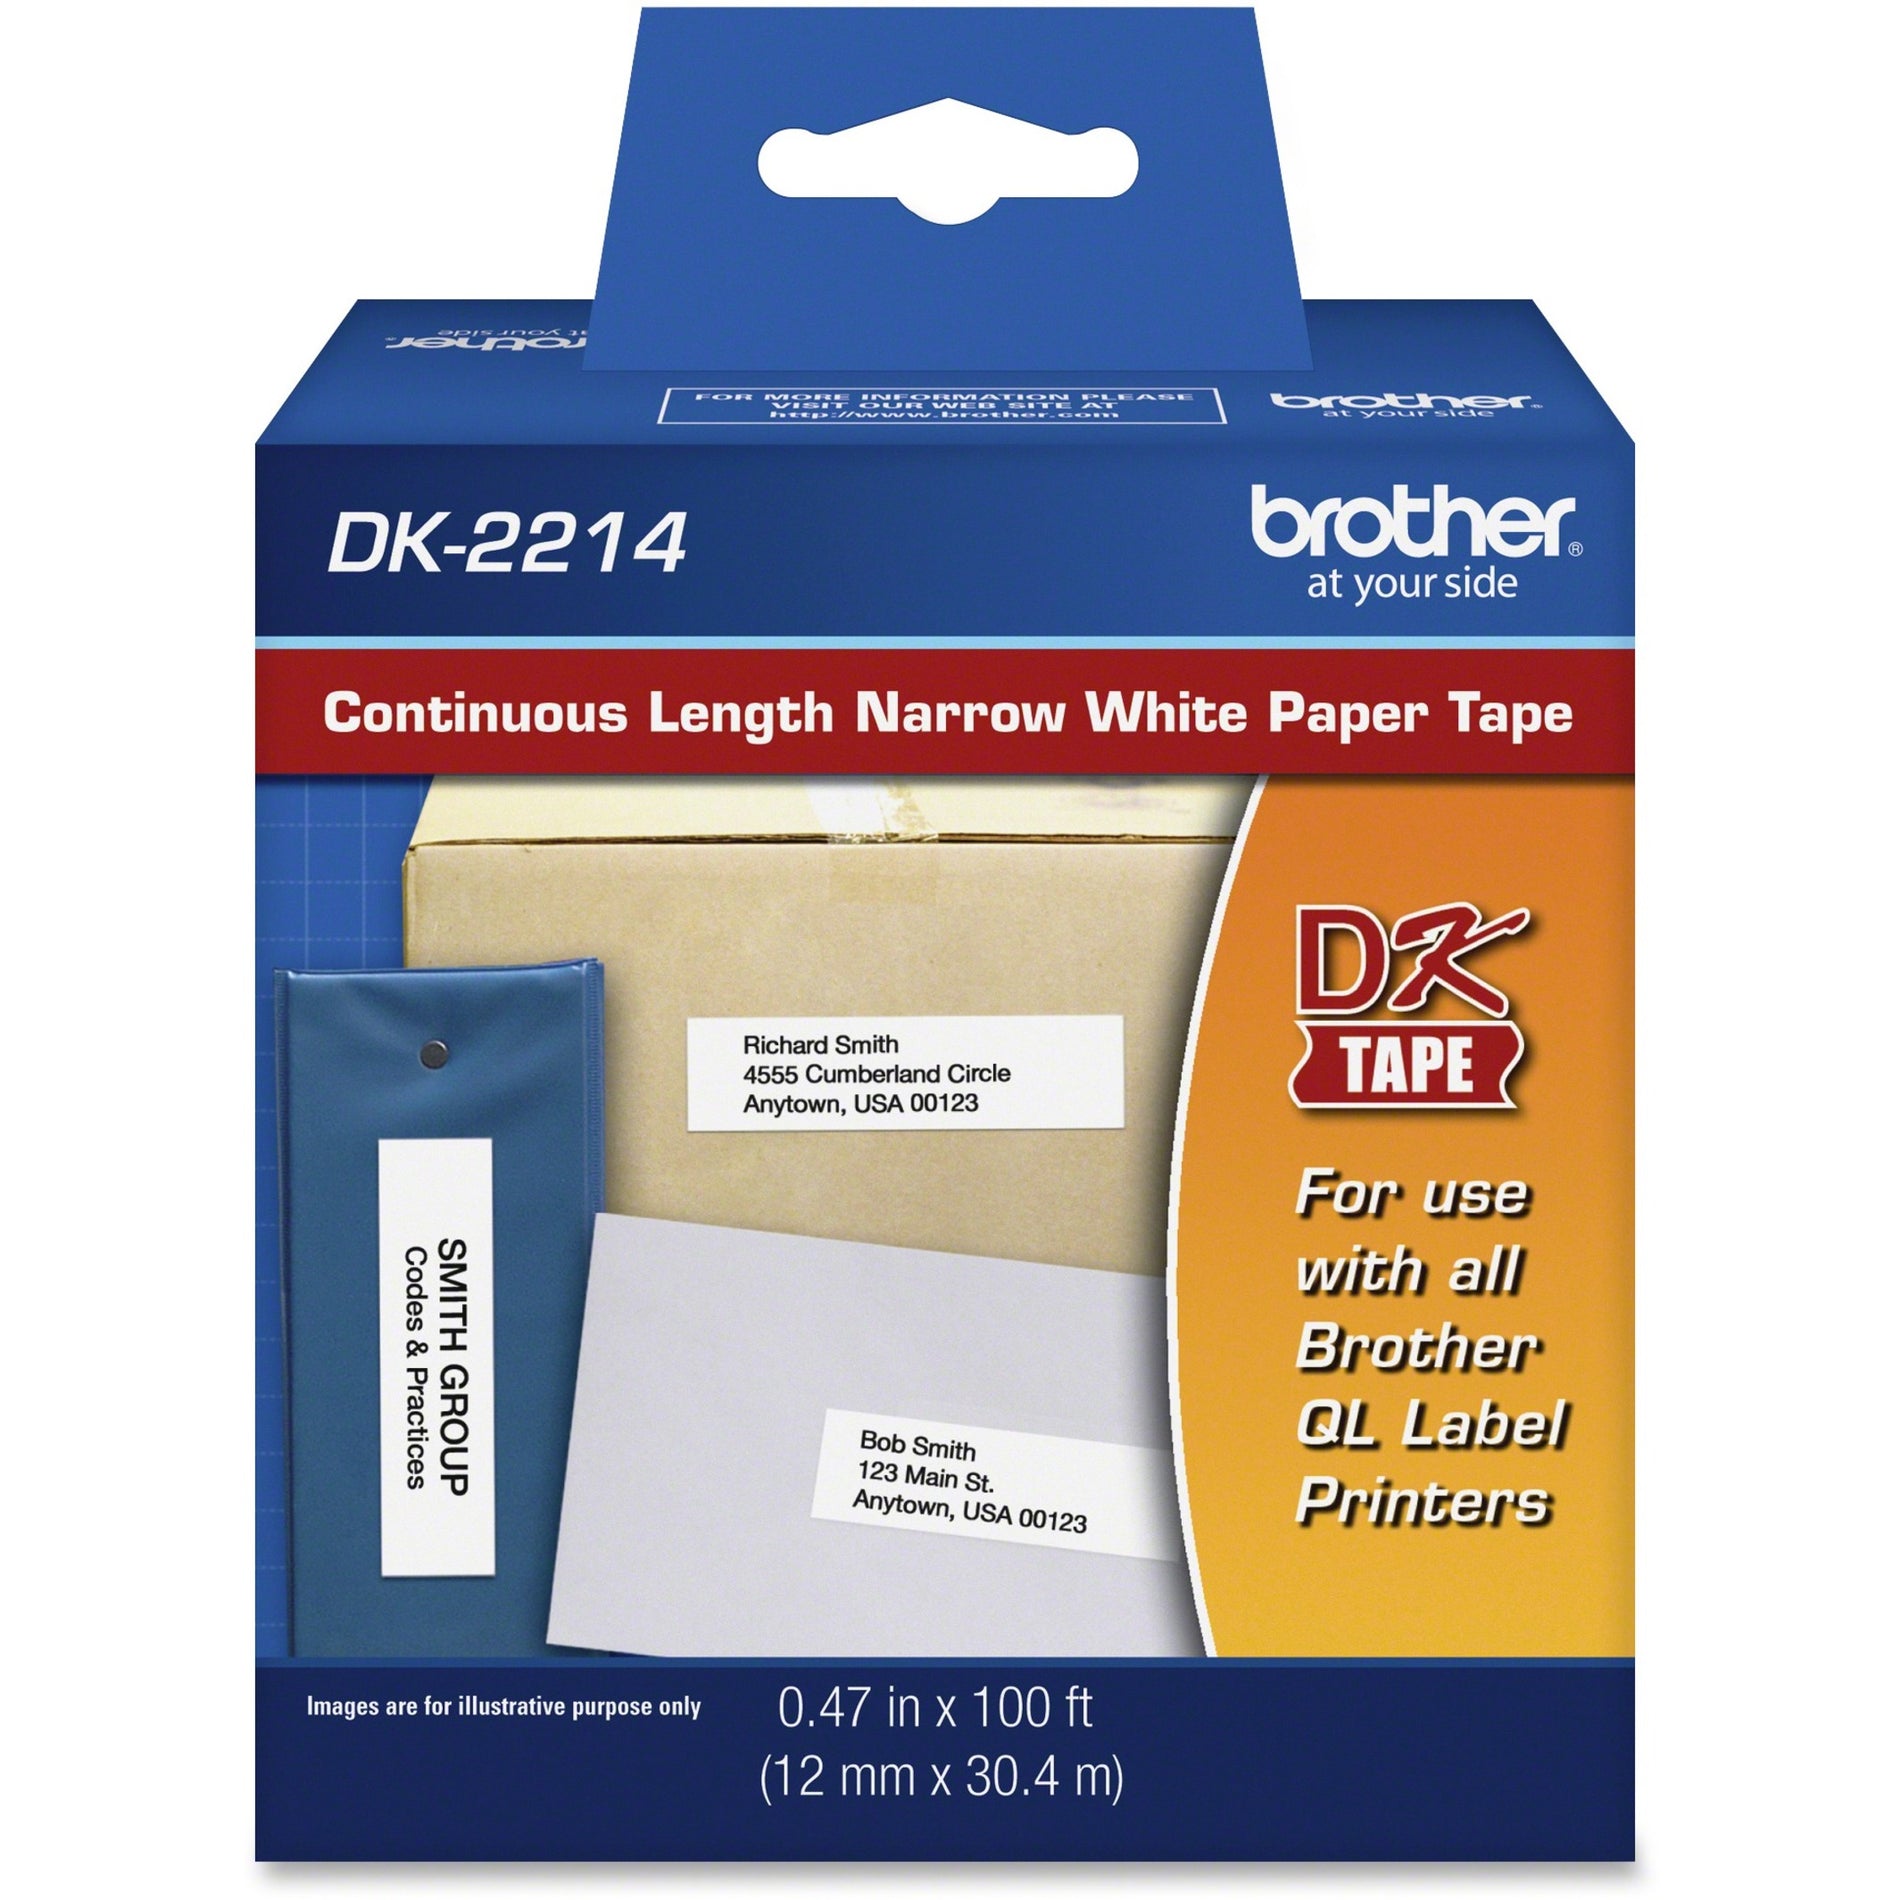 Brother DK2214 Continuous Length White Label Tape, 1/2"x100', for Brother QL Label Printers